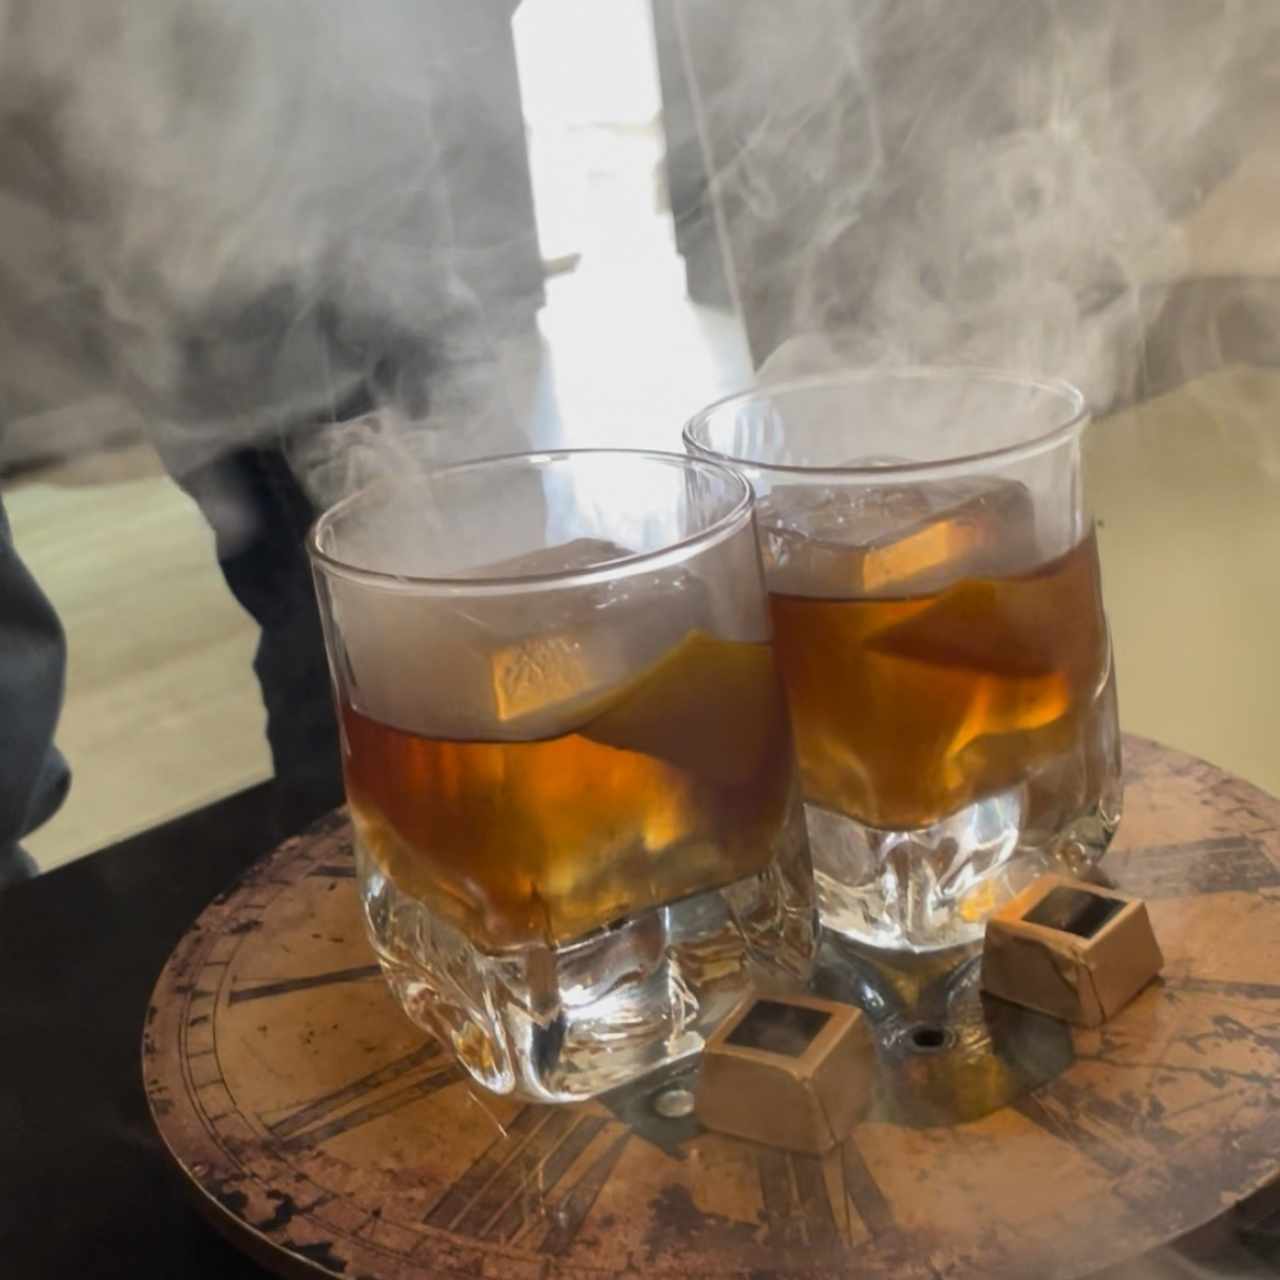 Smoked Cacao Old Fashion by Zacapa